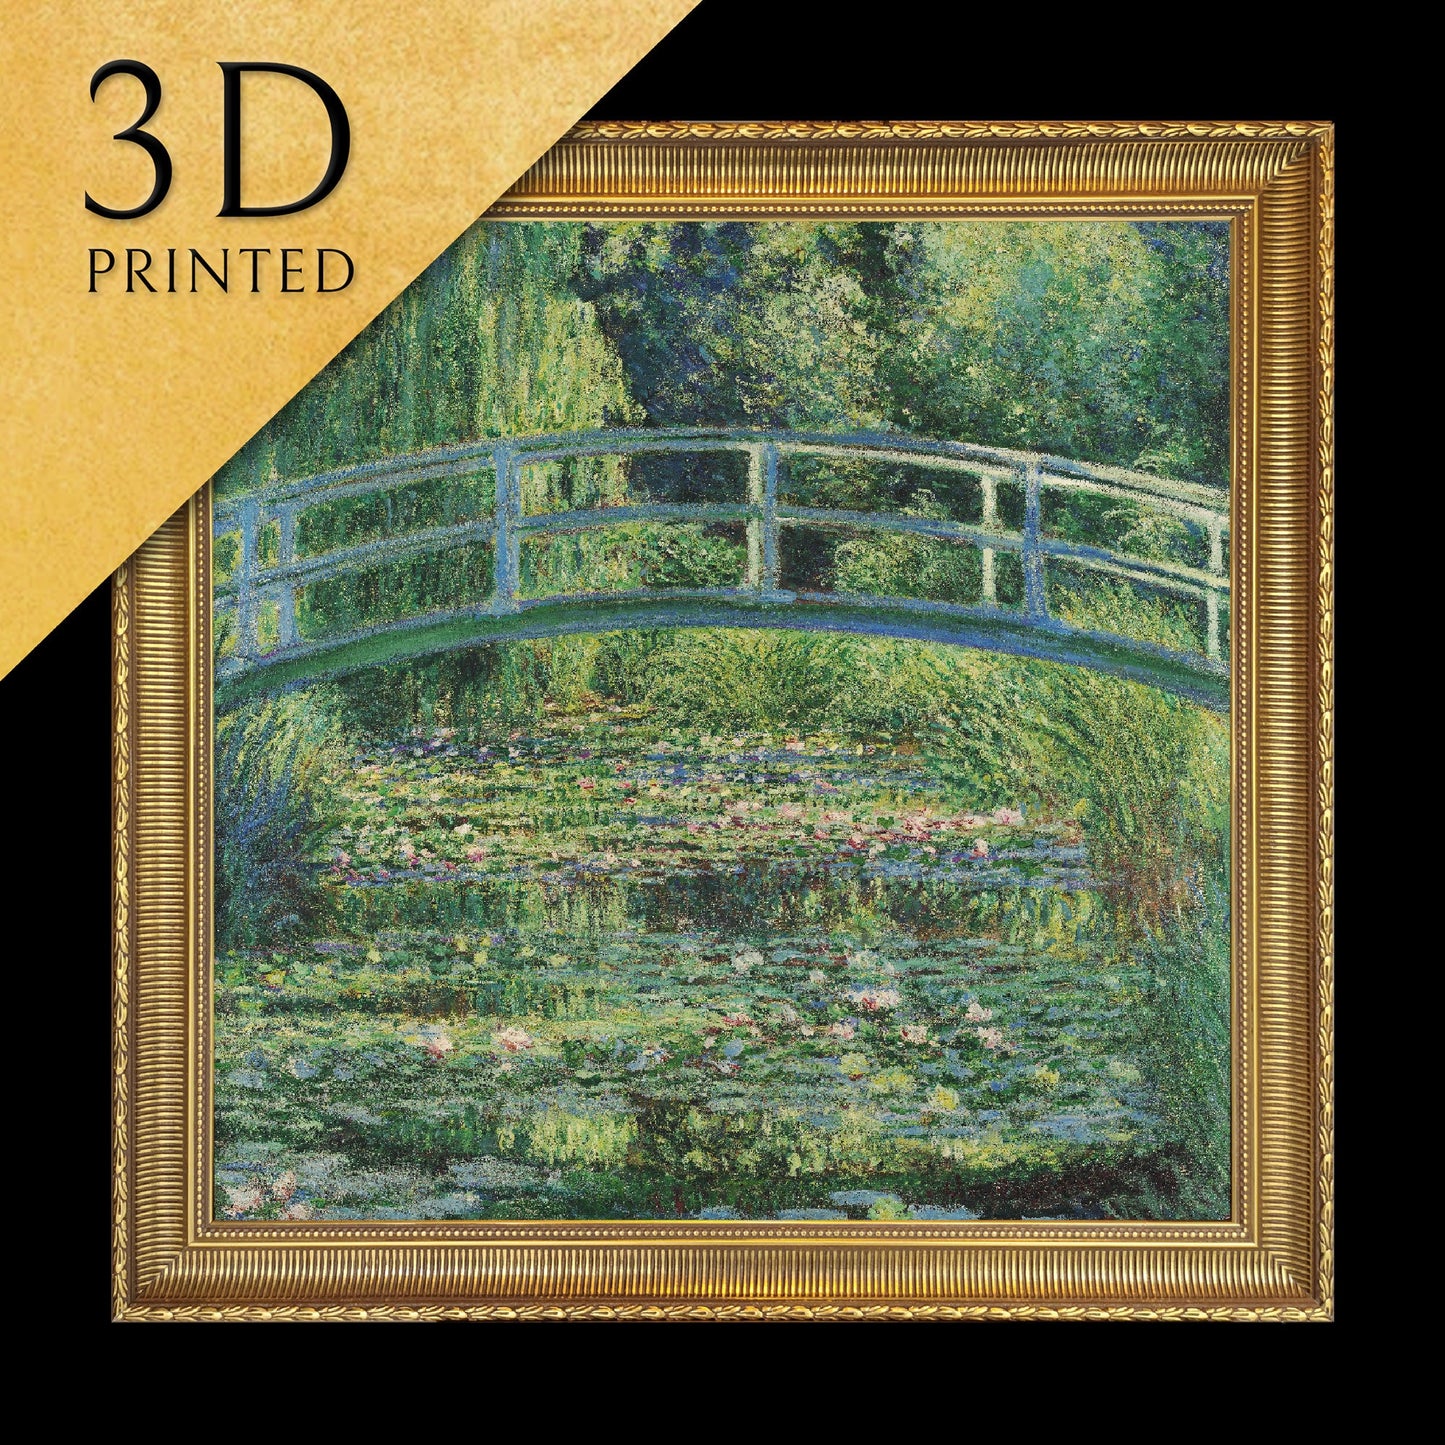 The Water Lily Pond by Claude Monet, 3d Printed with texture and brush strokes looks like original oil-painting, code:021